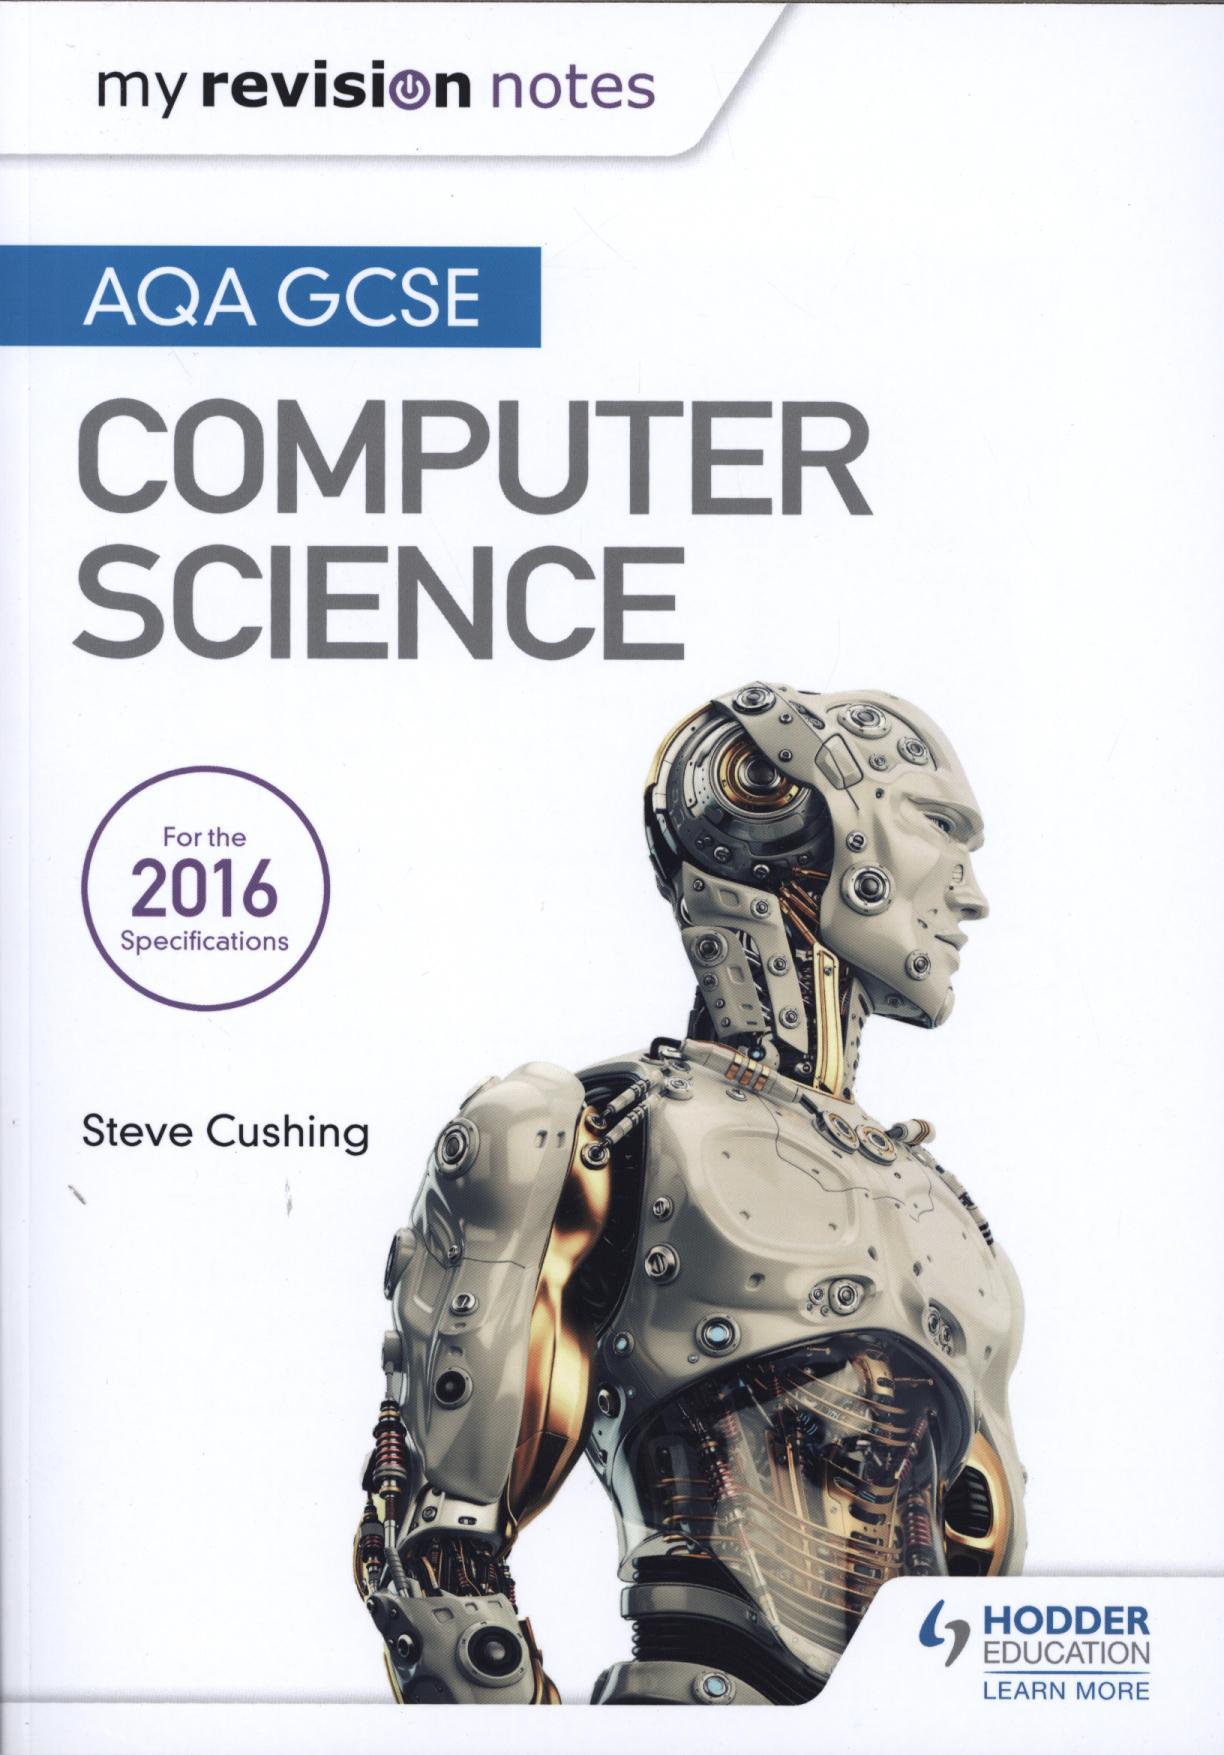 AQA GCSE Computer Science My Revision Notes